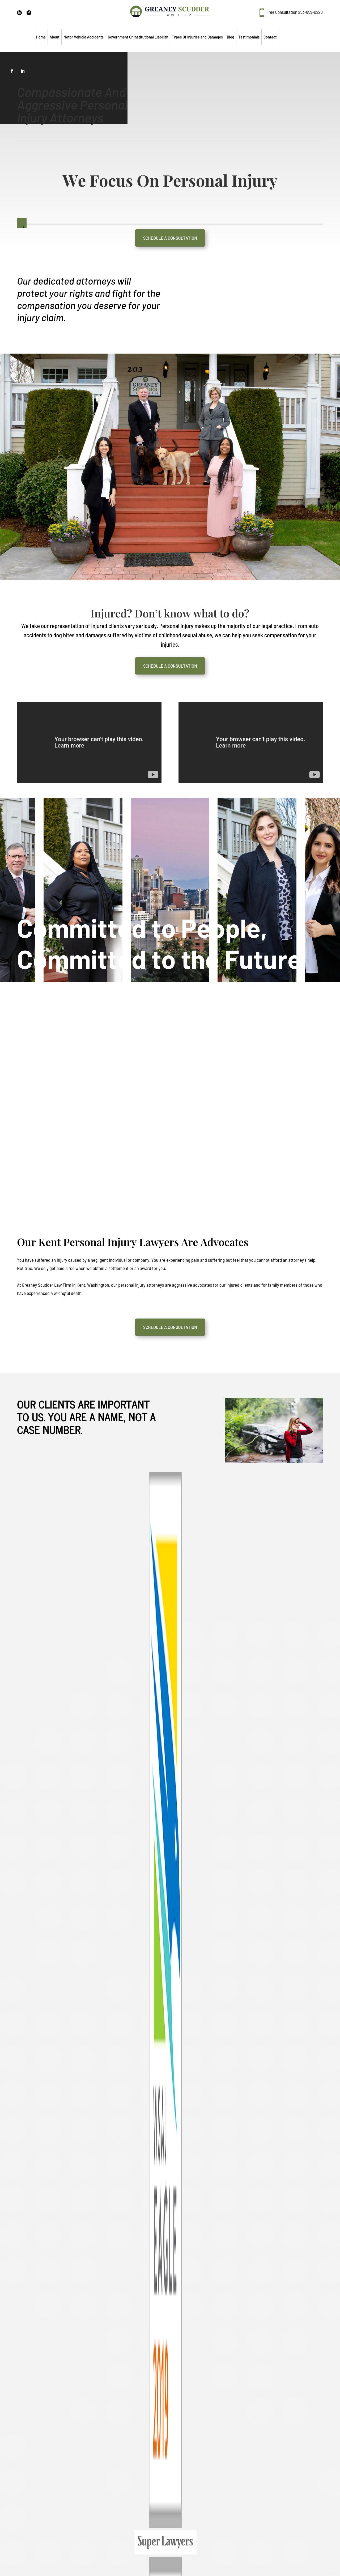 Greaney Law Firm, PLLC - Kent WA Lawyers